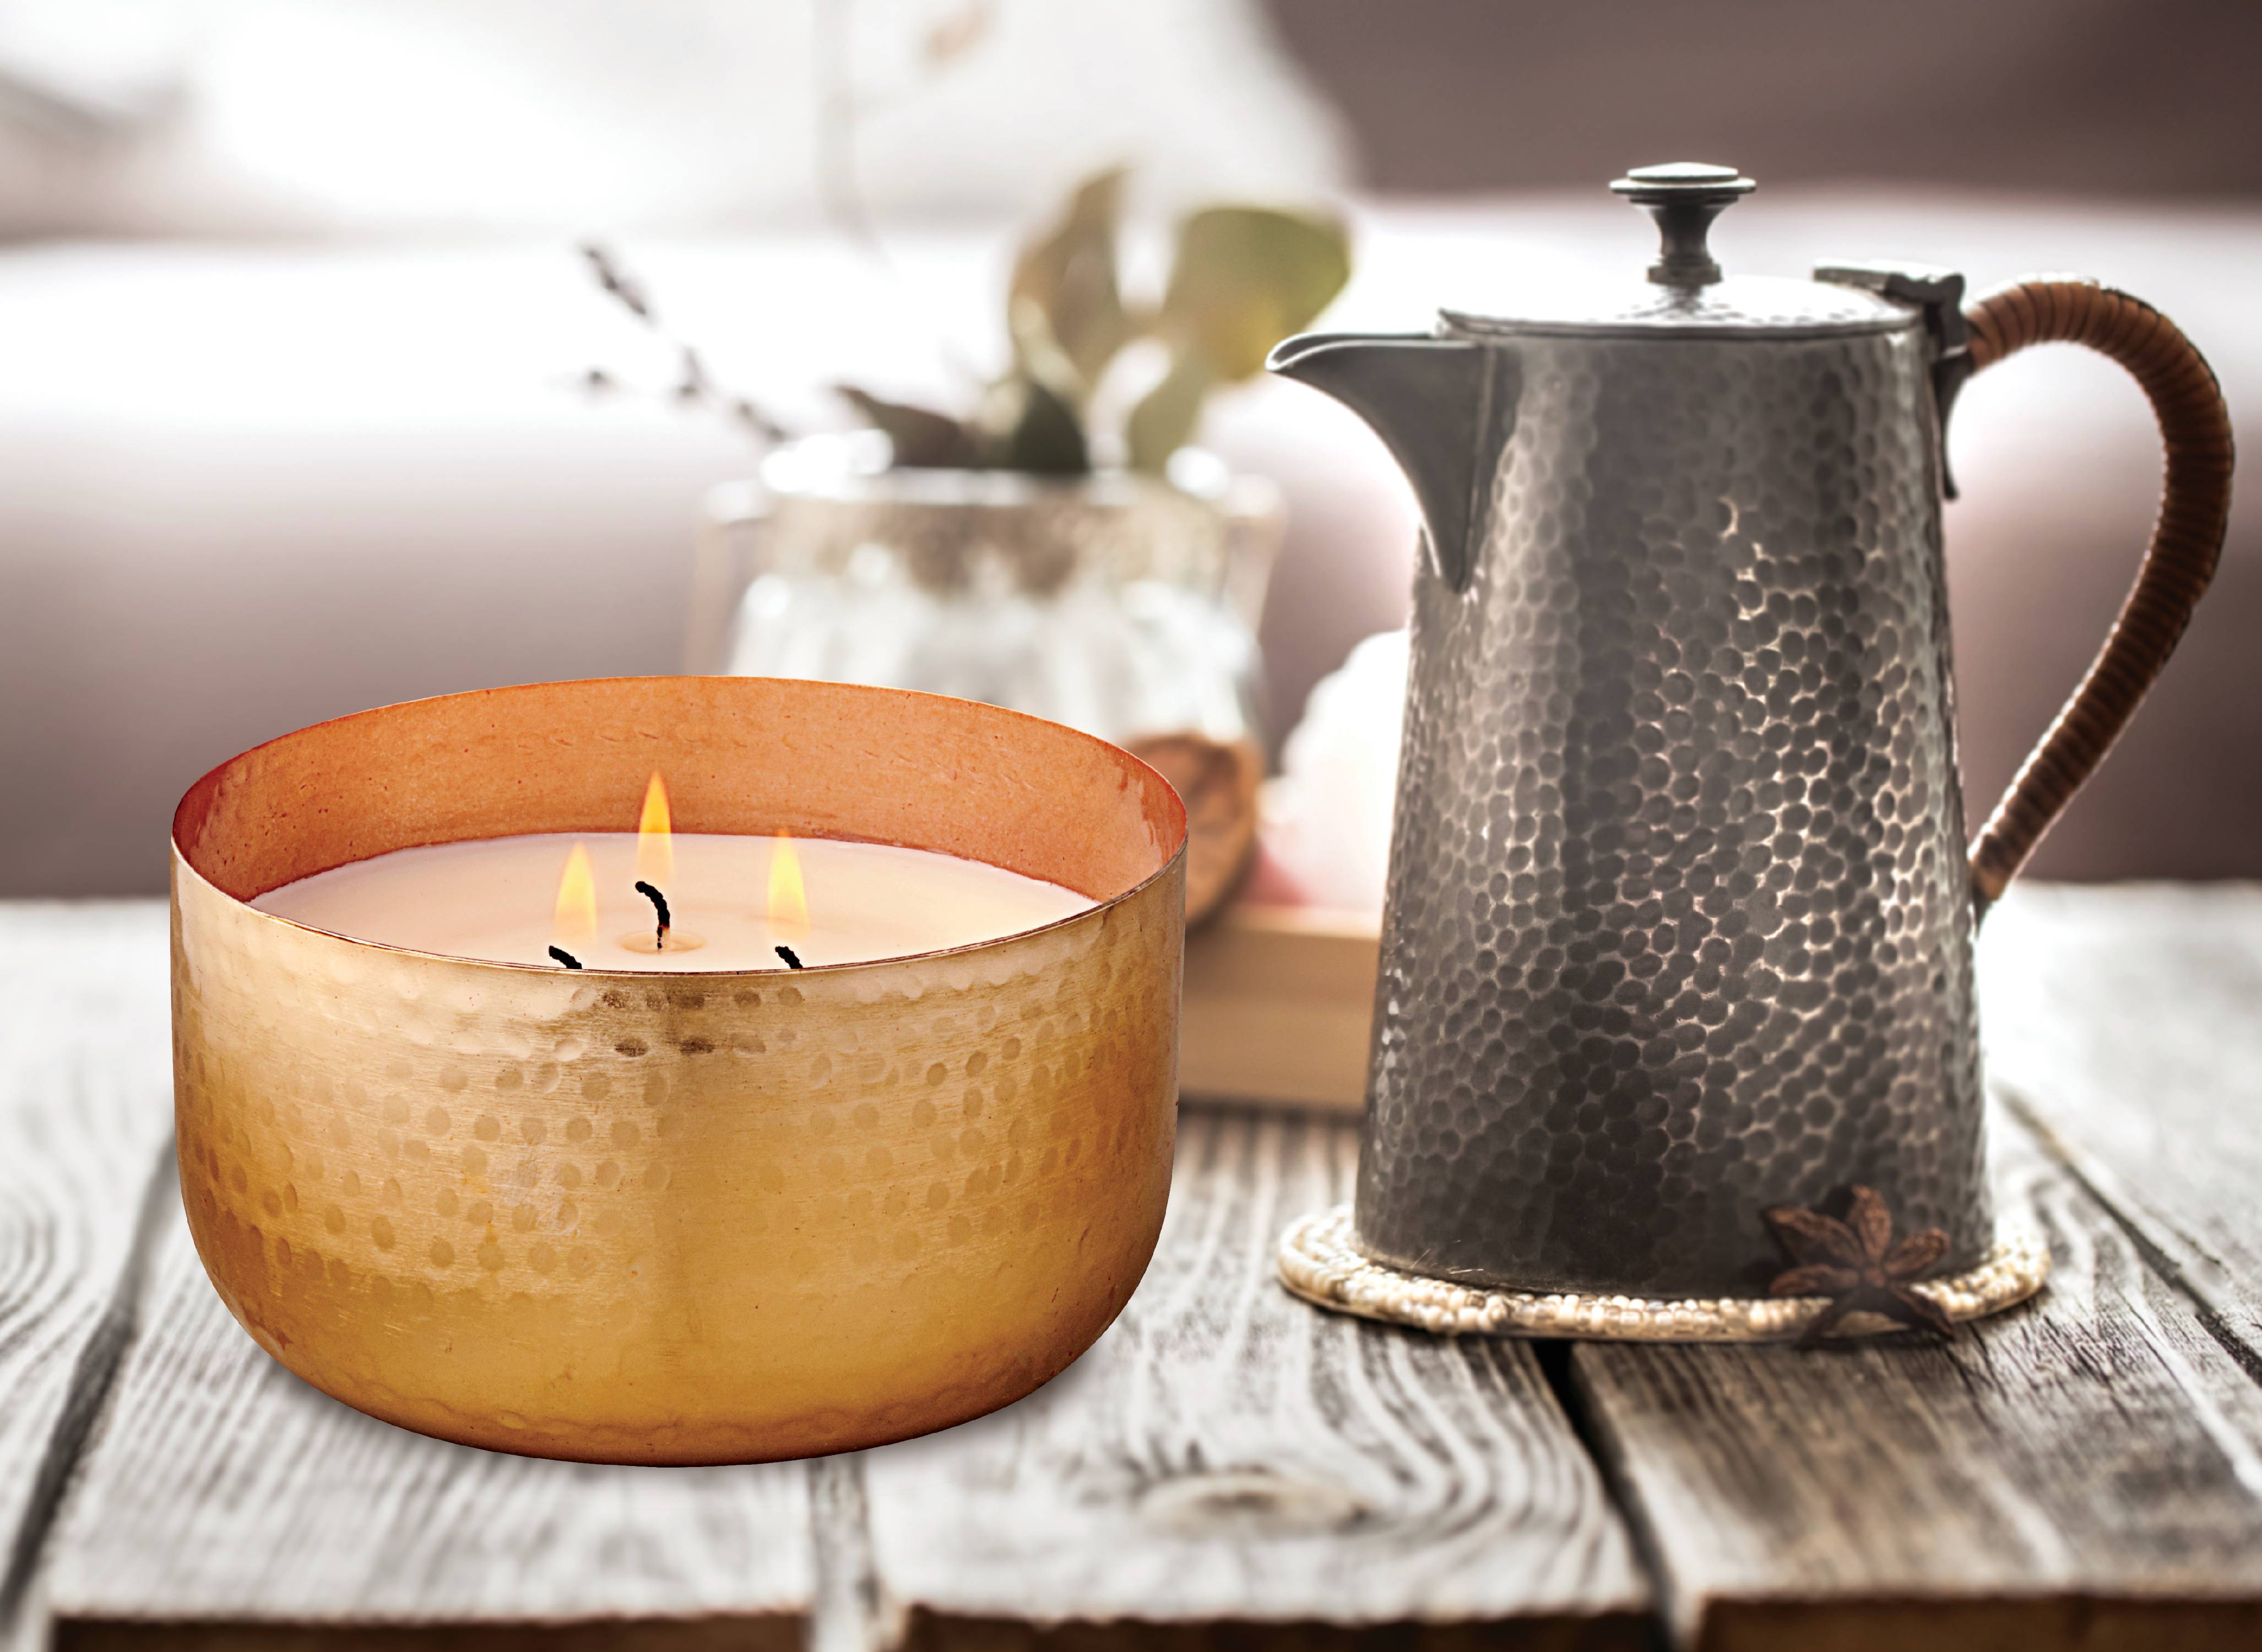 Better Homes & Gardens Gold Hammered Metal Bowl 3-Wick Soft Cashmere Amber Candle - image 3 of 3